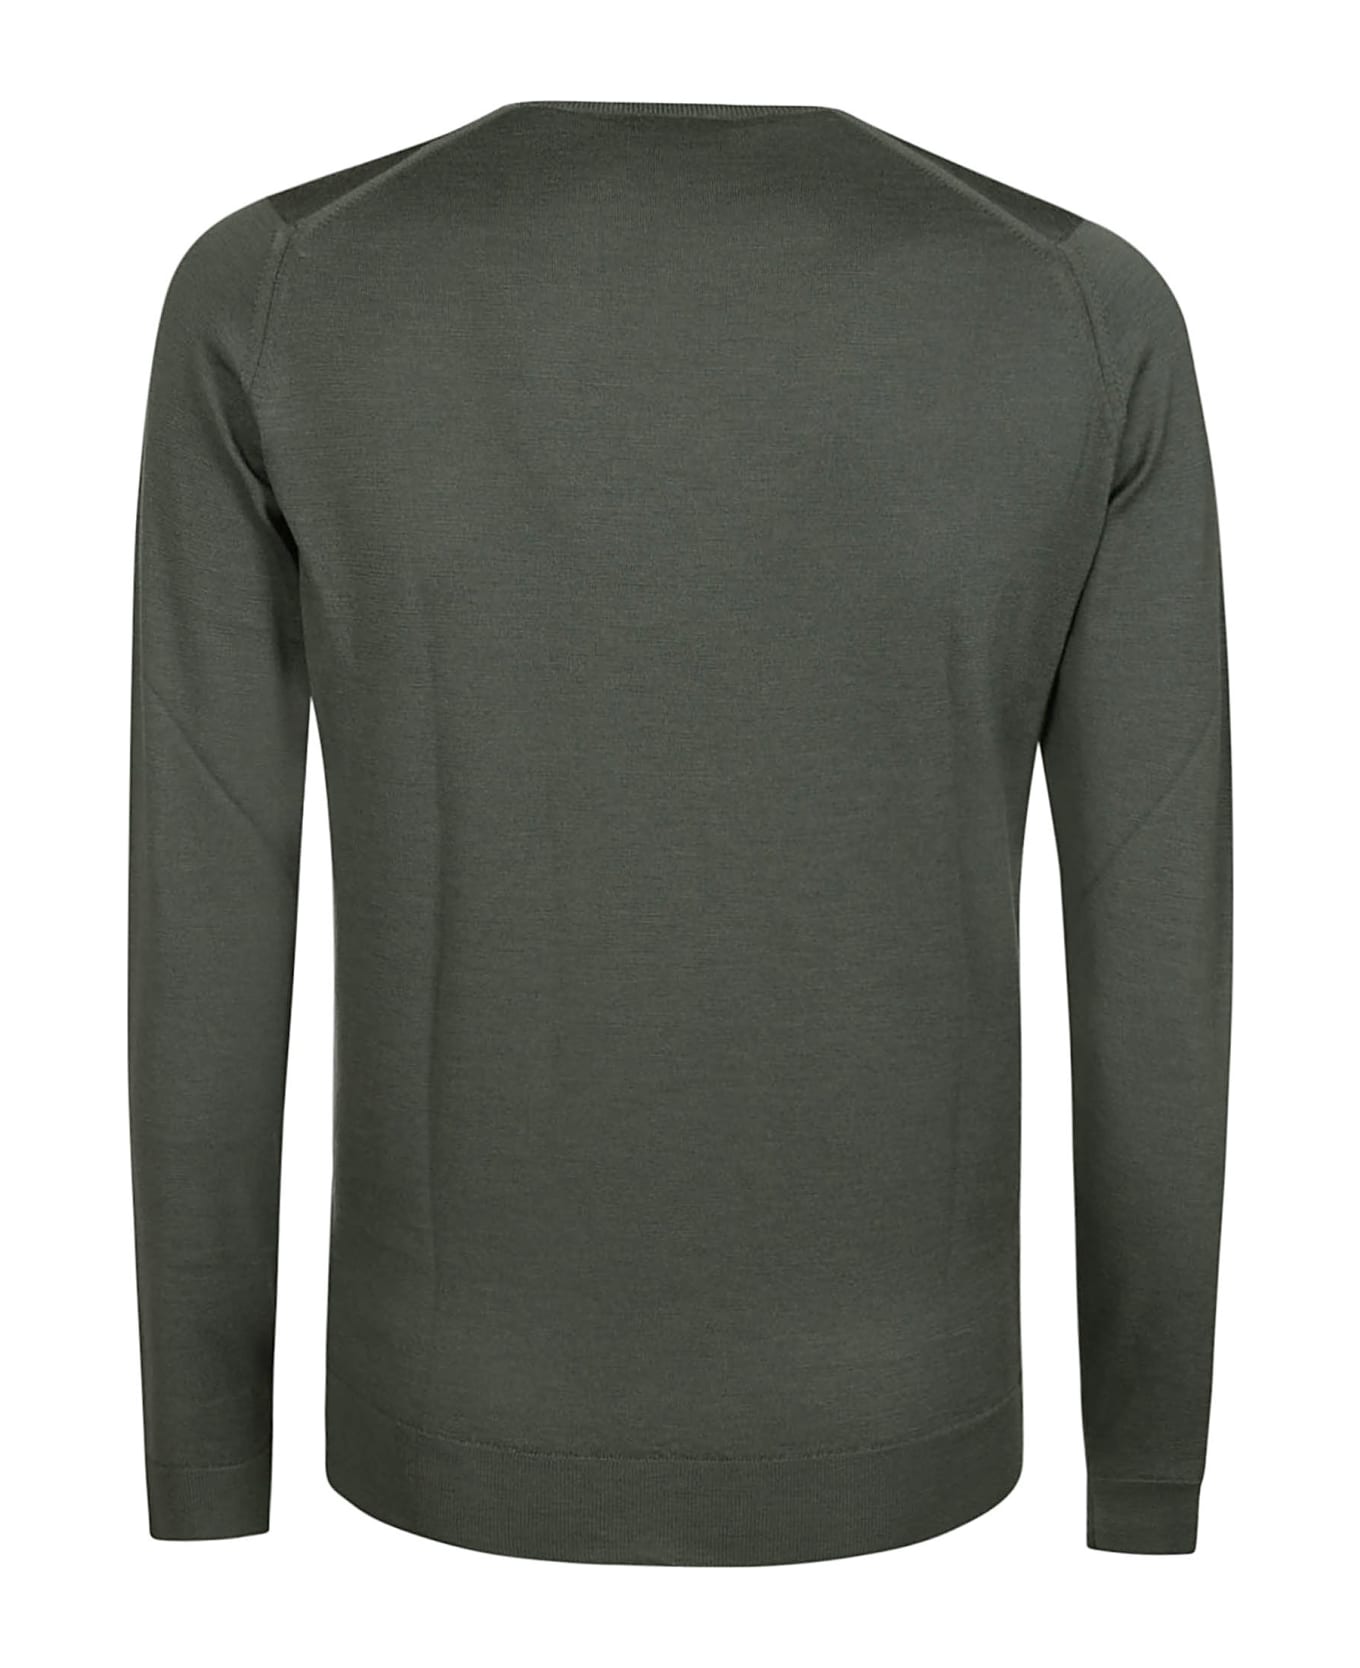 John Smedley Lundy Pullover Ls - GREEN